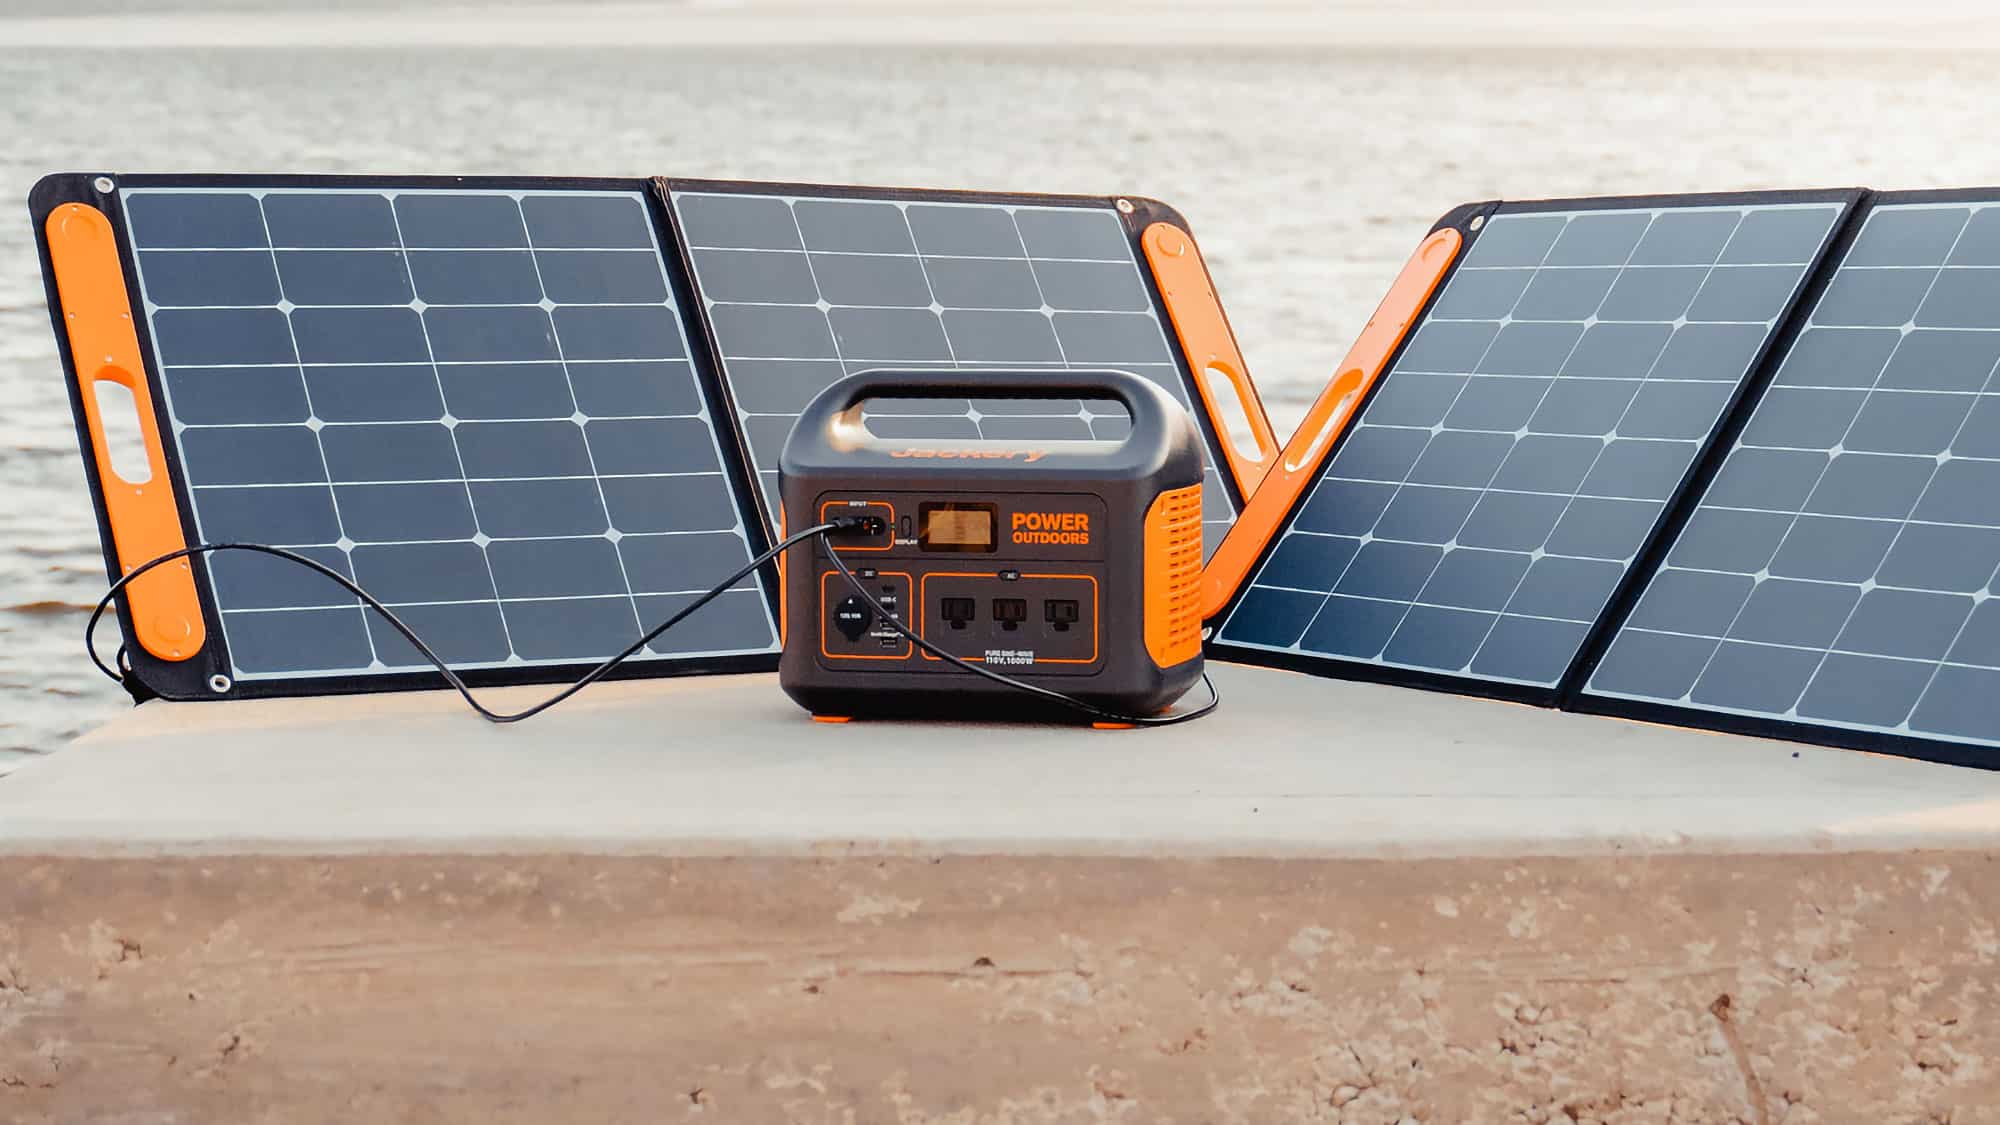 The Best 10 Portable Solar Panels To Charge Your Devices Effectively